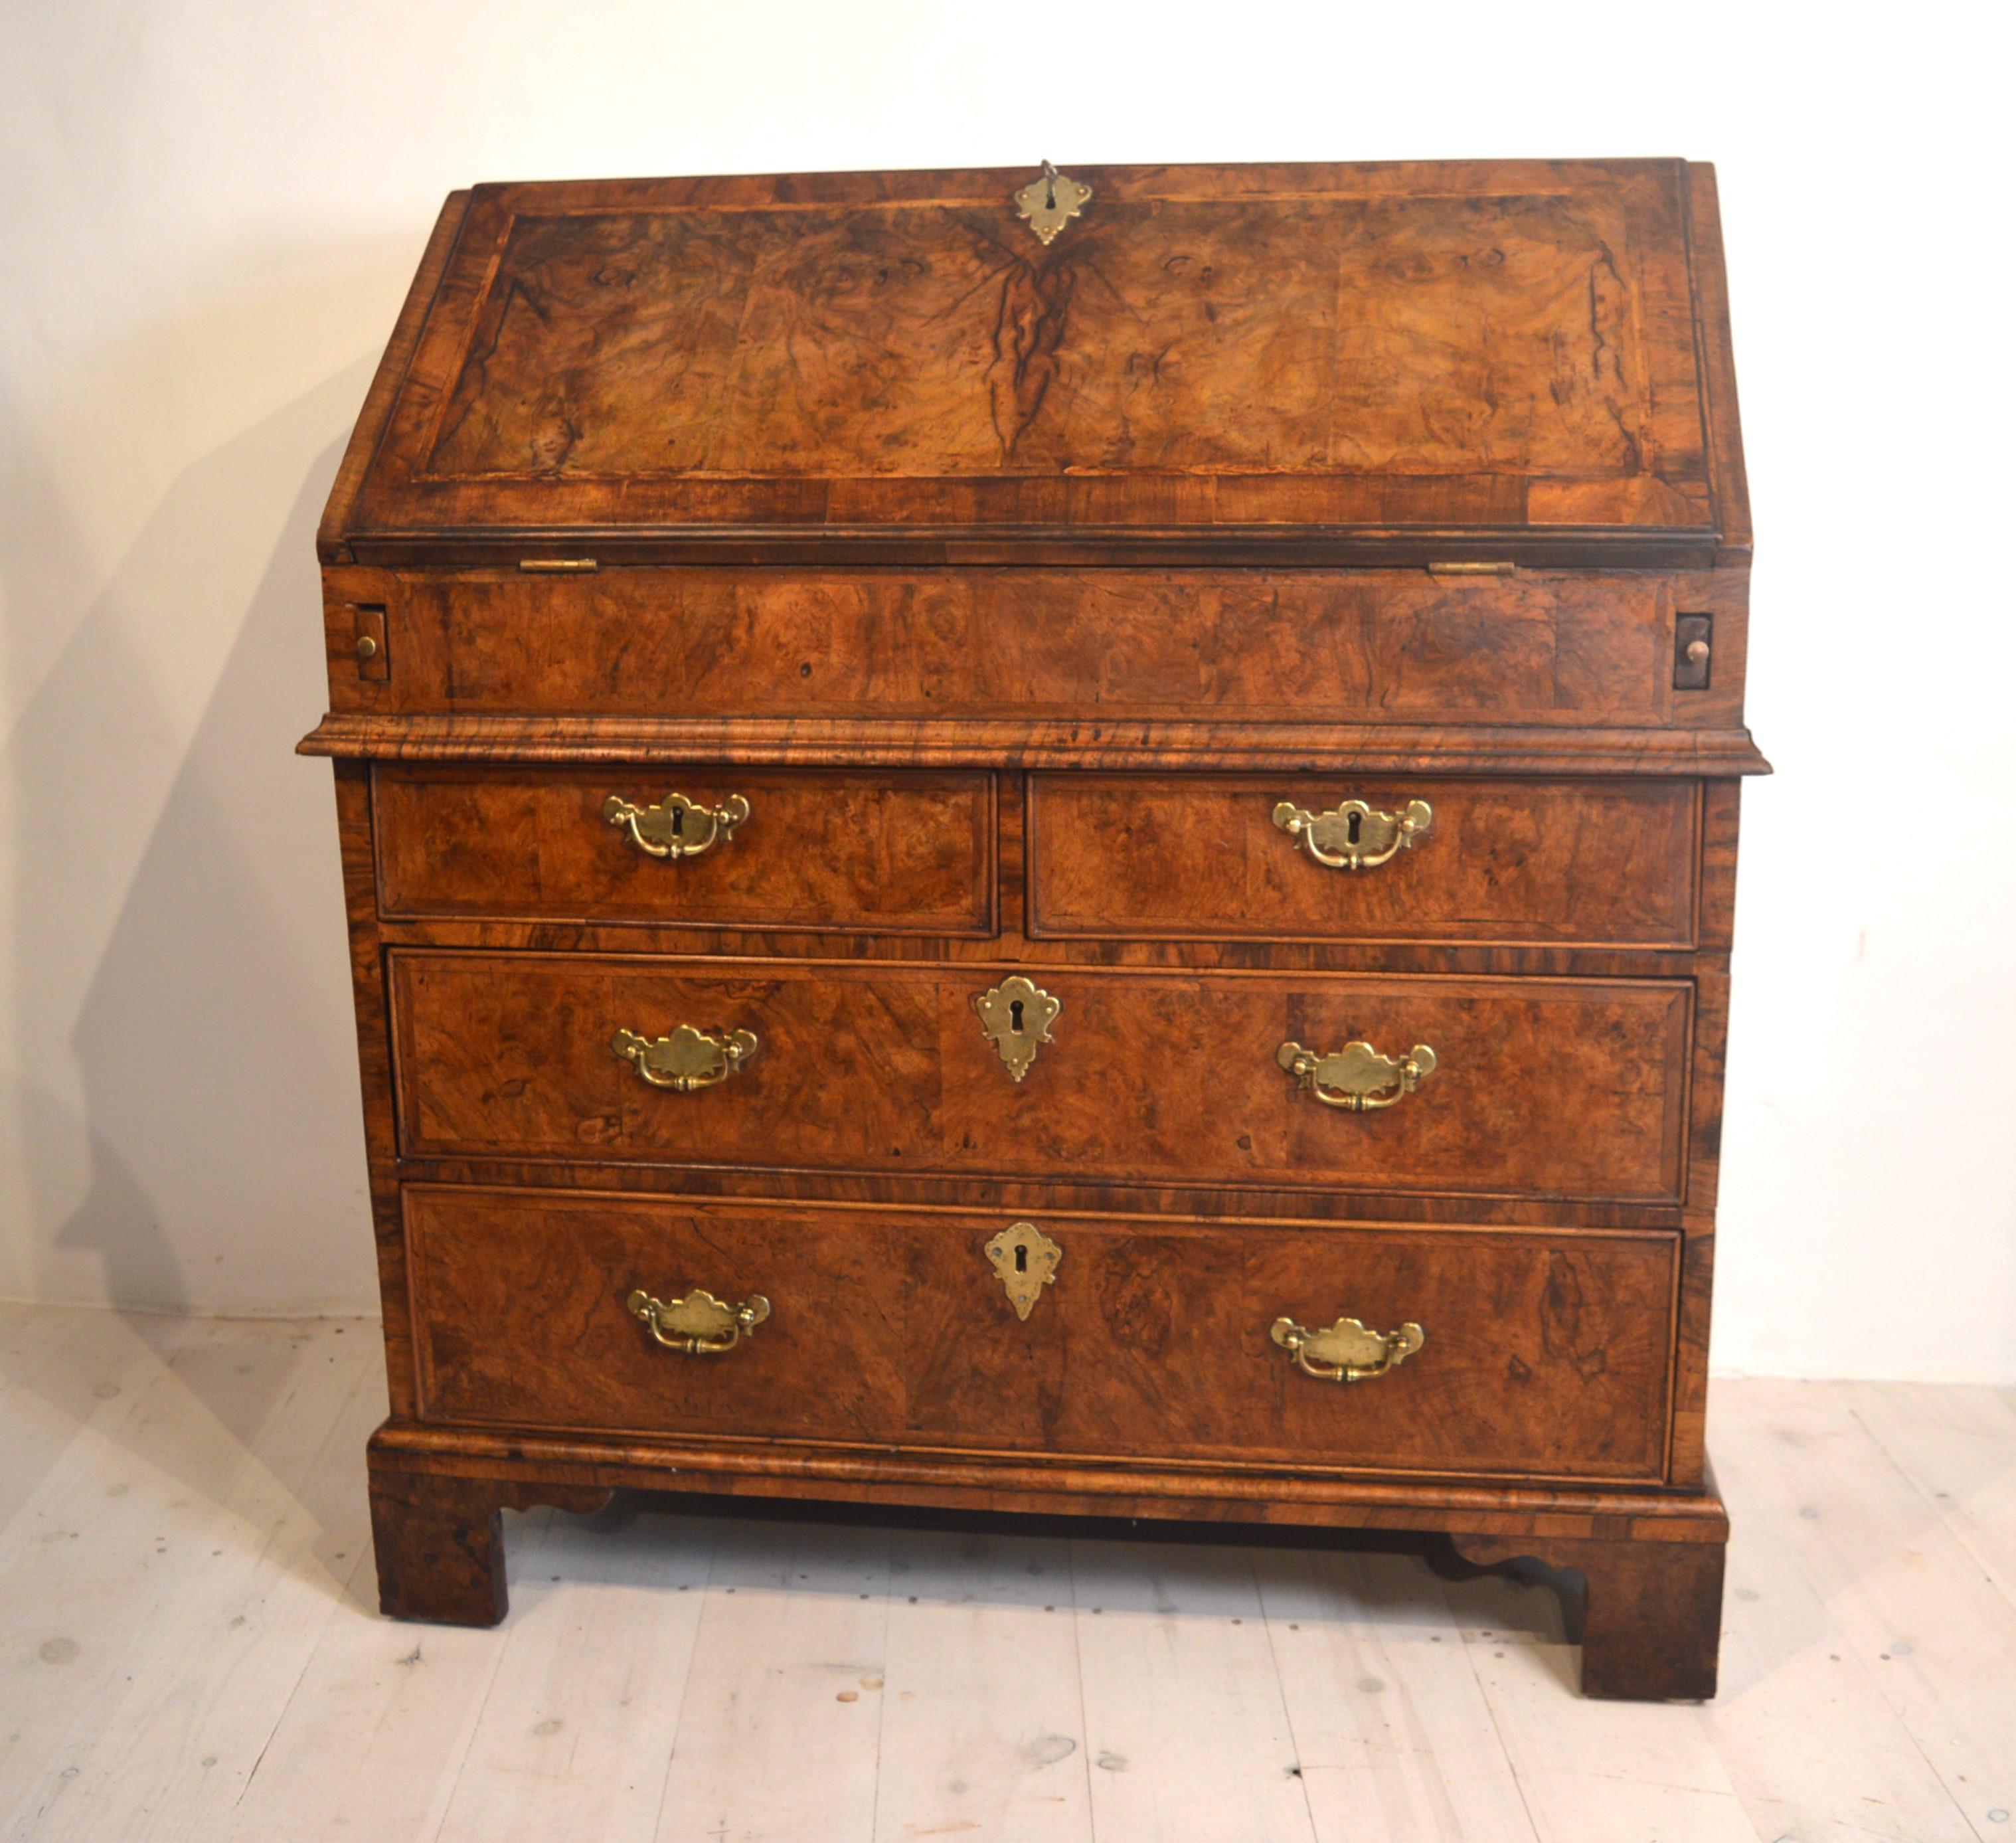 Here we have a very good quality early 18th century burr walnut bureau, with a well and stepped interior, a door and drawers on the inside.  Sitting on bracket feet it  also has a cross-cut waist moulding and the veneer is herringbone inlay .The